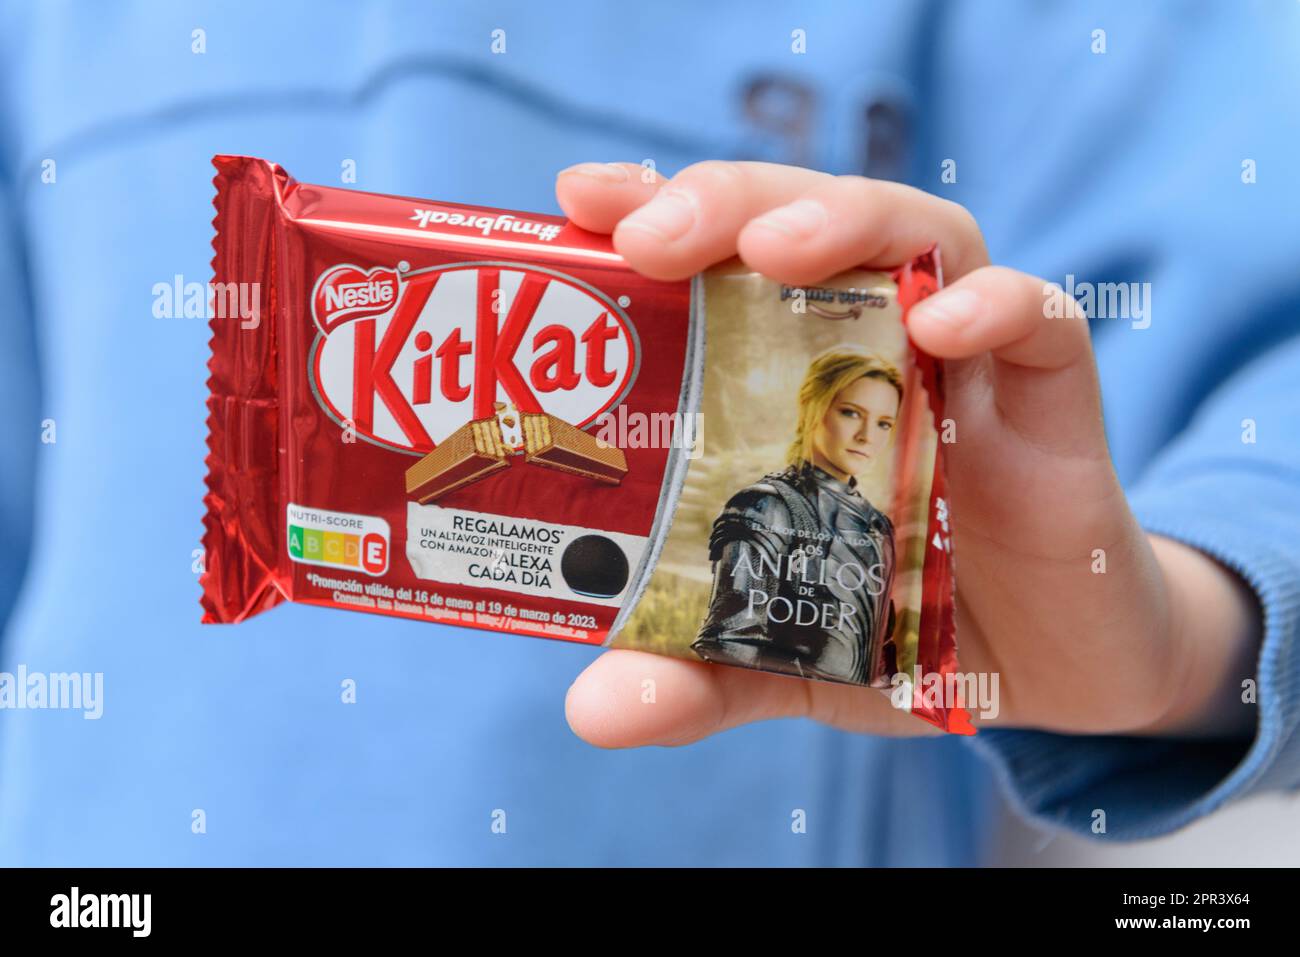 Arahal. Seville. Spain. March 18, 2023. Closeup of a child's hands holding a candy bar from the brand Nestle KitKat. Excessive consumption of sugar ca Stock Photo